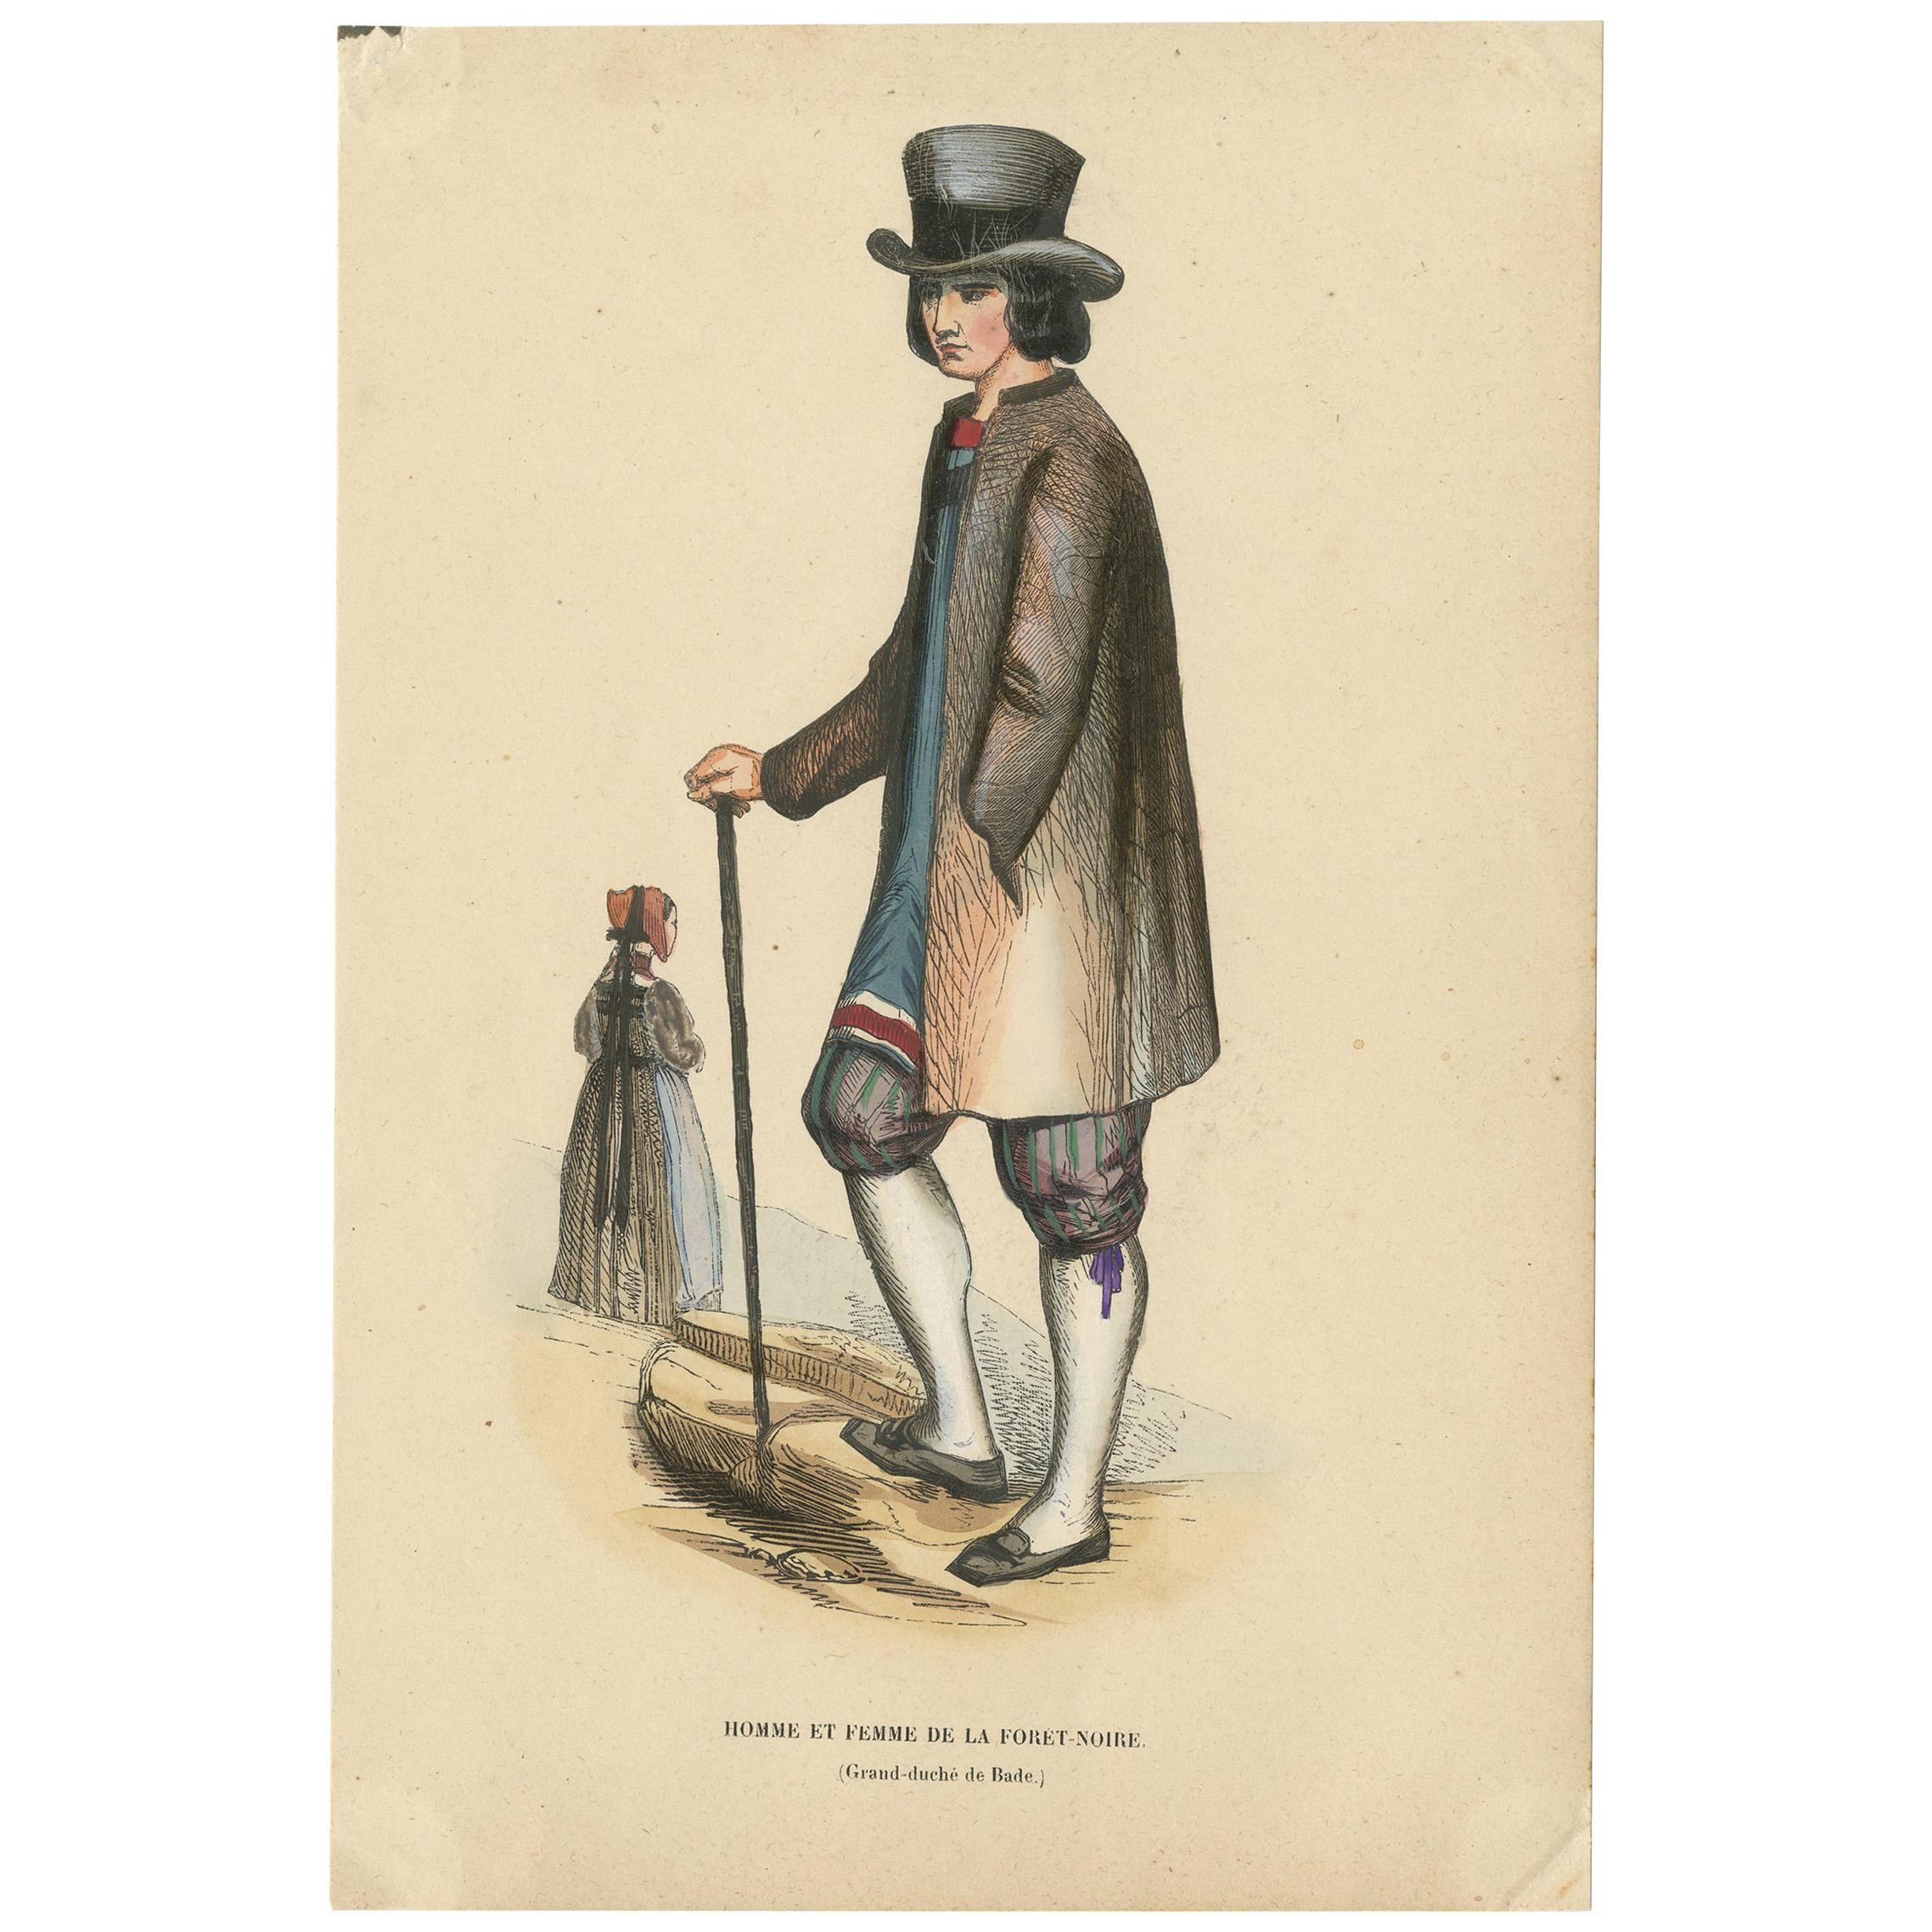 Antique Costume Print of Figures from the Black Forest by Wahlen, 1843